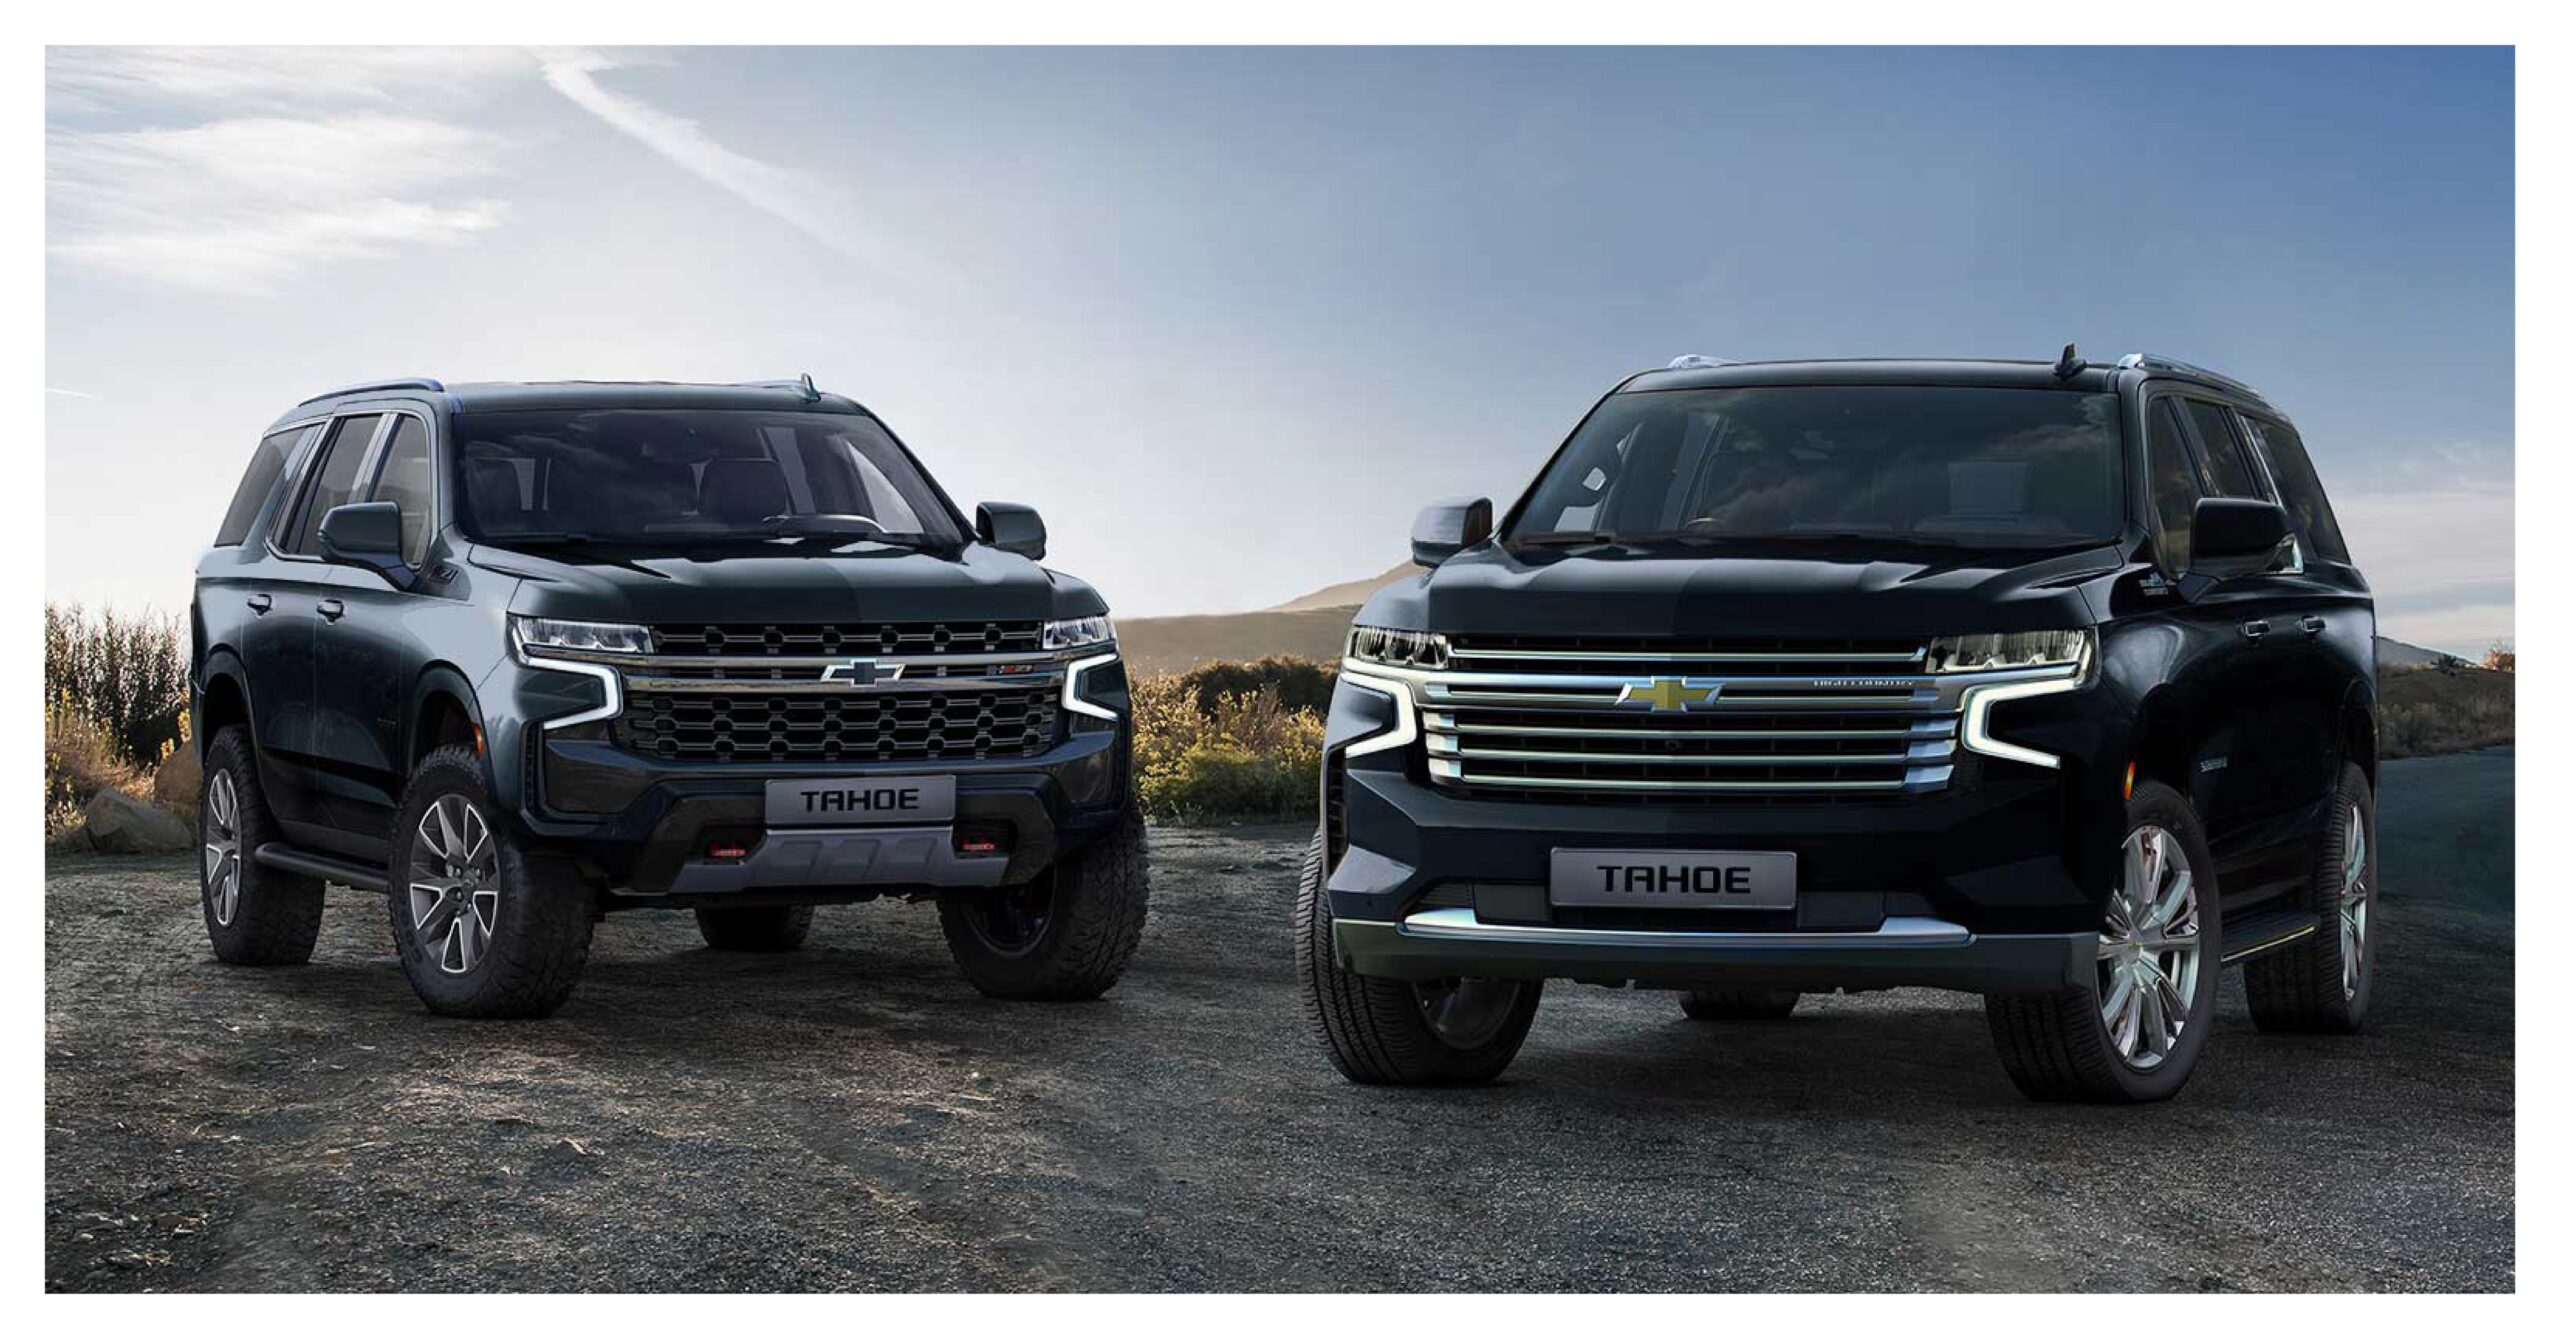 Chevrolet’s newest generation Tahoe SUV is here